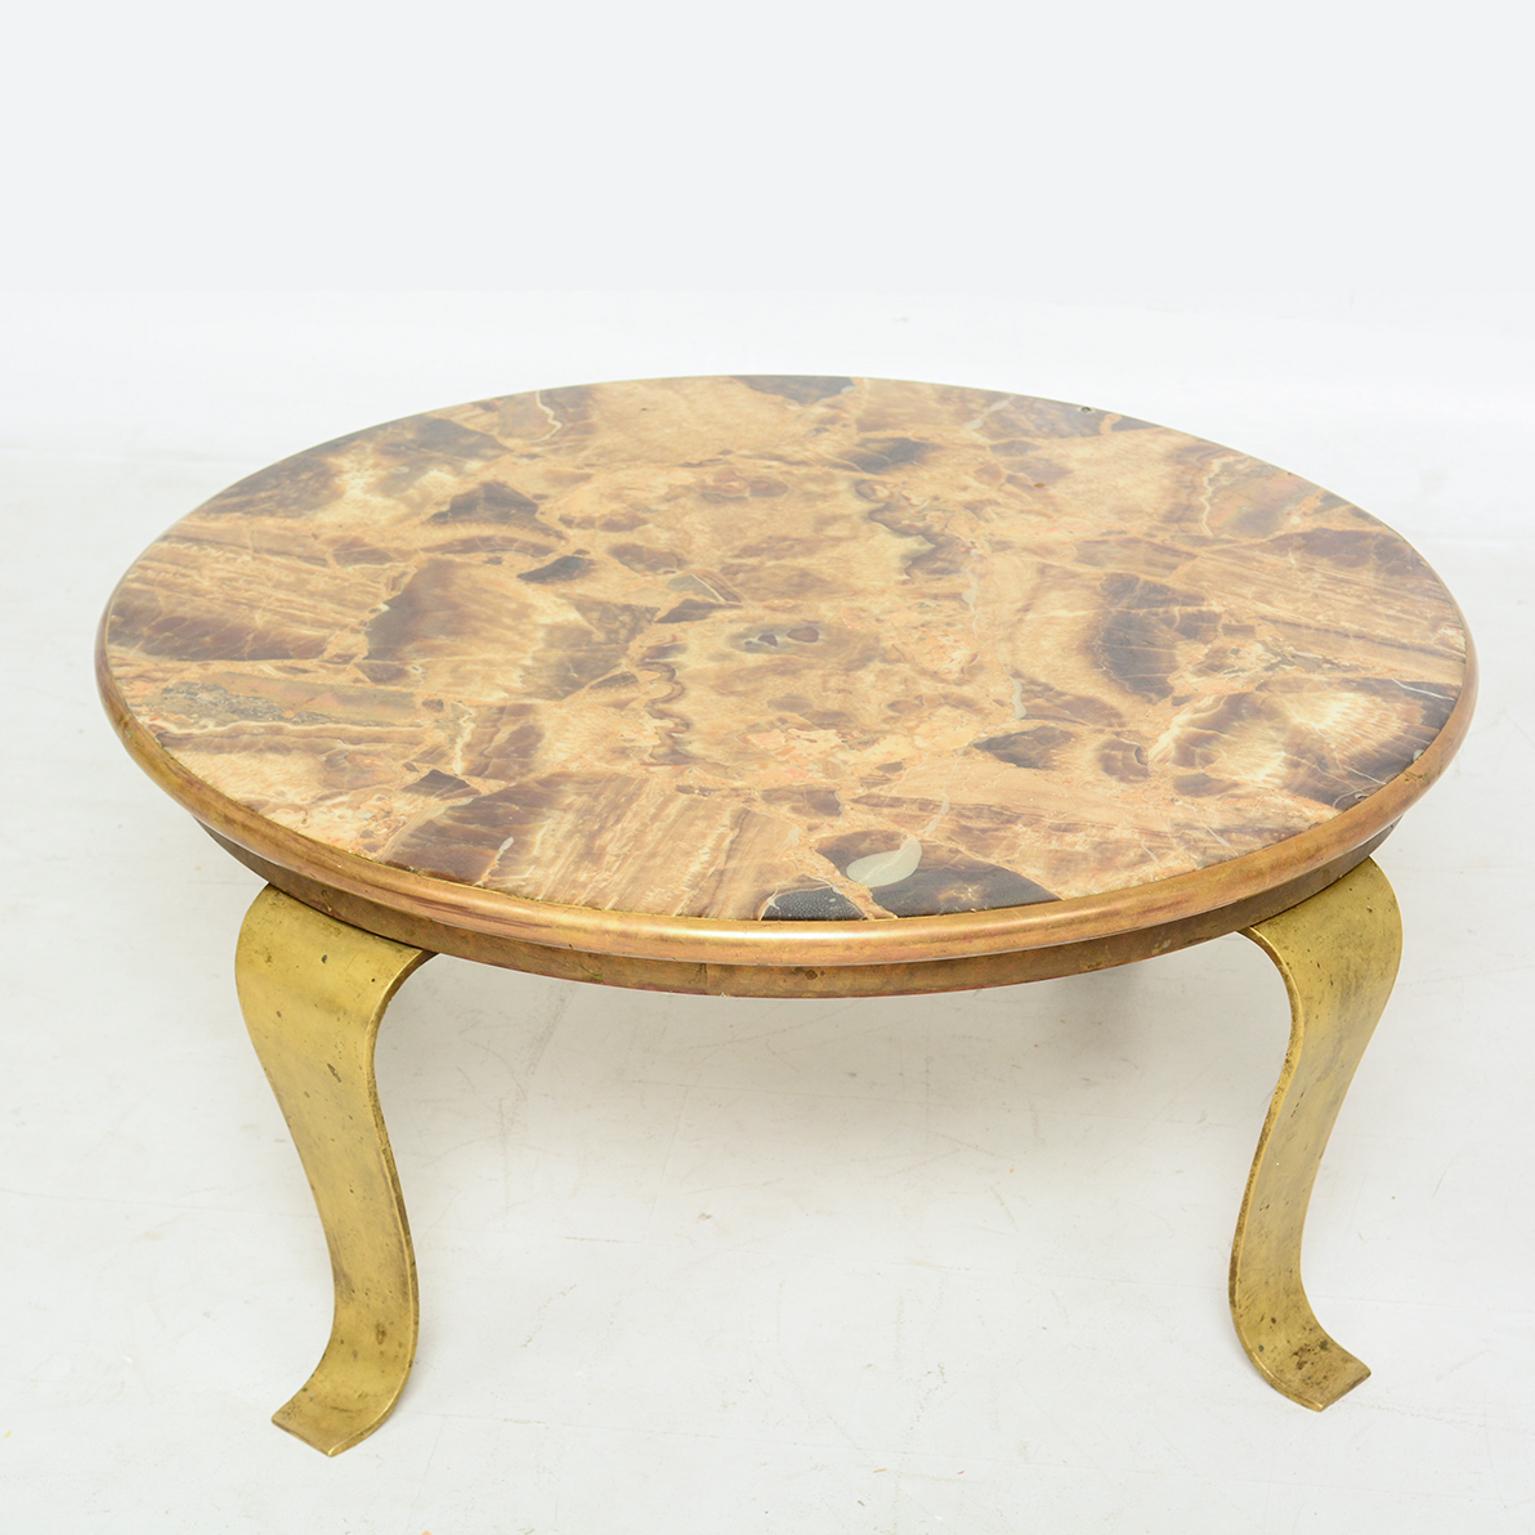 For your consideration: Marble round coffee table with solid brass sculptural legs. The legs have a tapered finish and can be removed from the table for safe and easy shipping.
Designed by Arturo Pani for Muller of Mexico, circa 1960s designed to